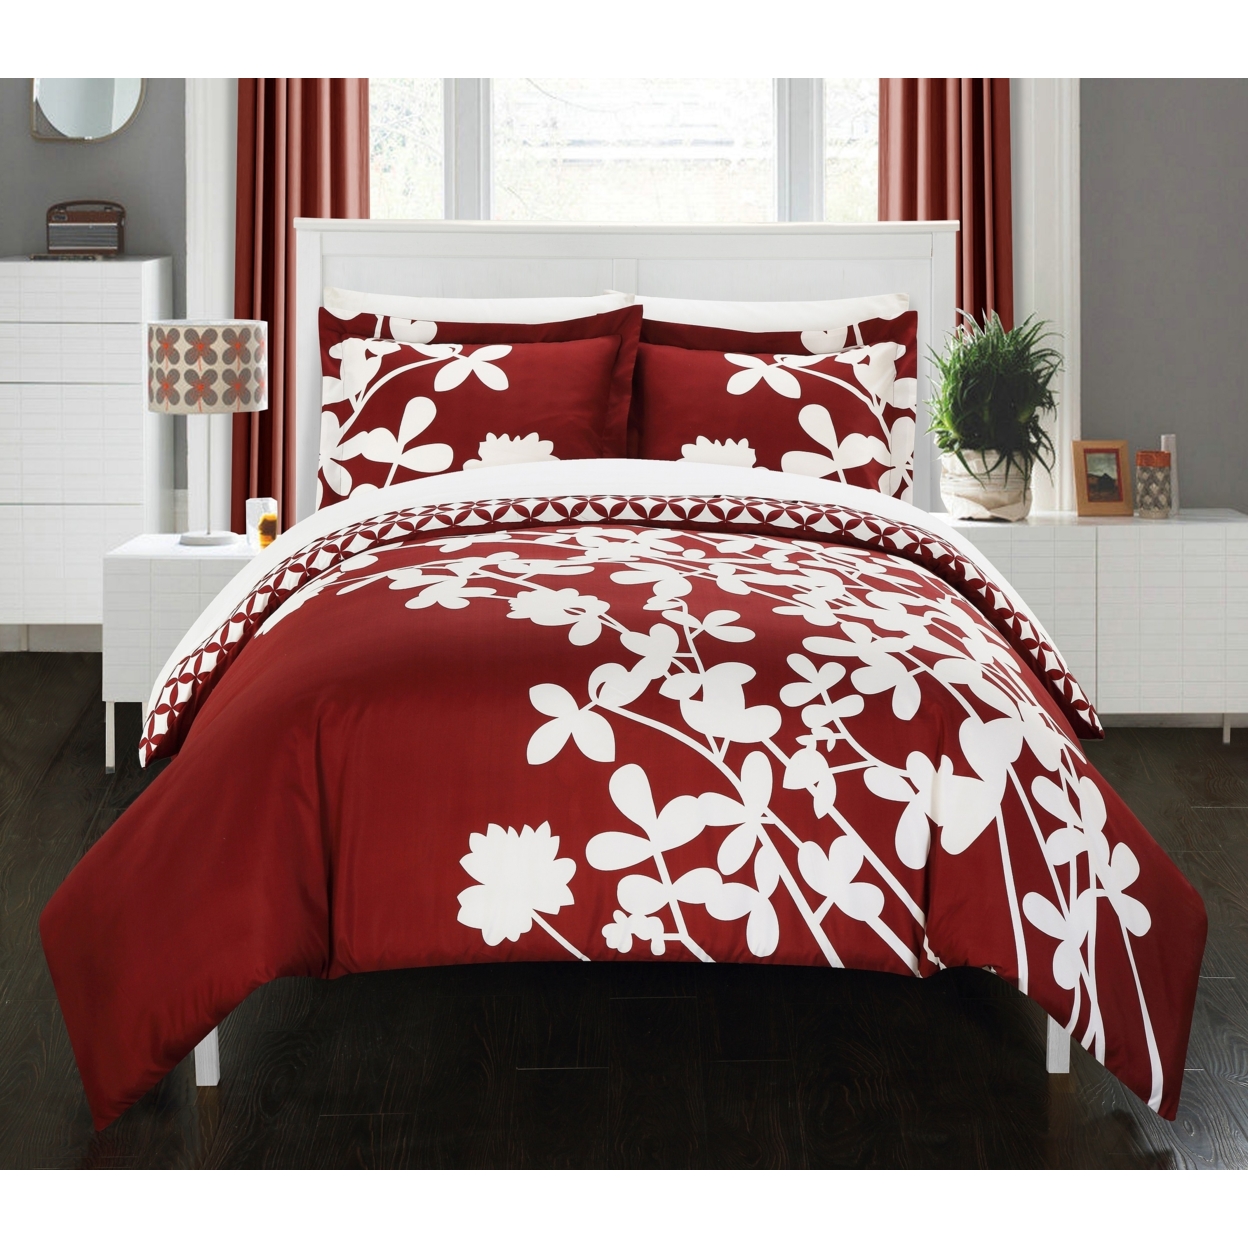 3 Piece Amaryllis Reversible Large Scale Floral Design Printed With Diamond Pattern Reverse Duvet Cover Set - Gray, King